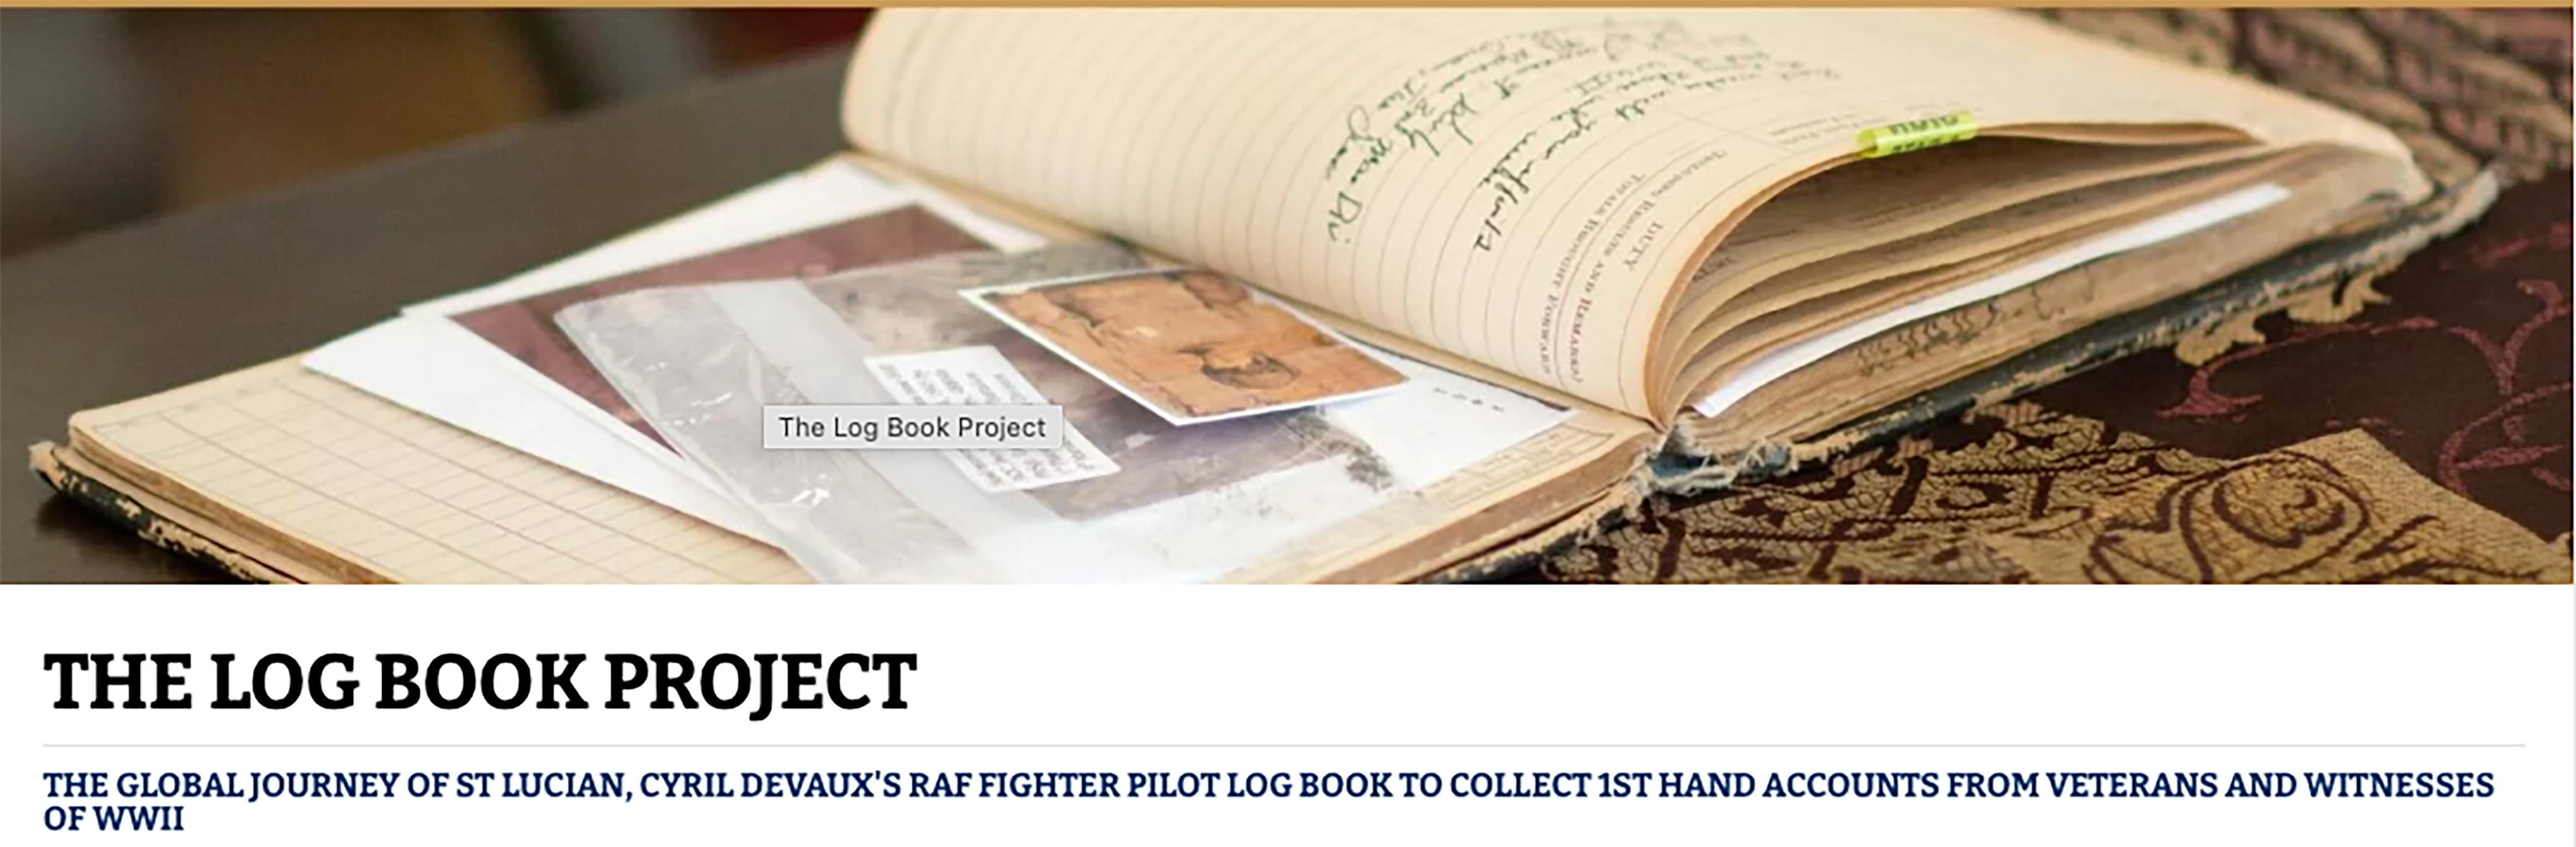 The Log Book Project site header